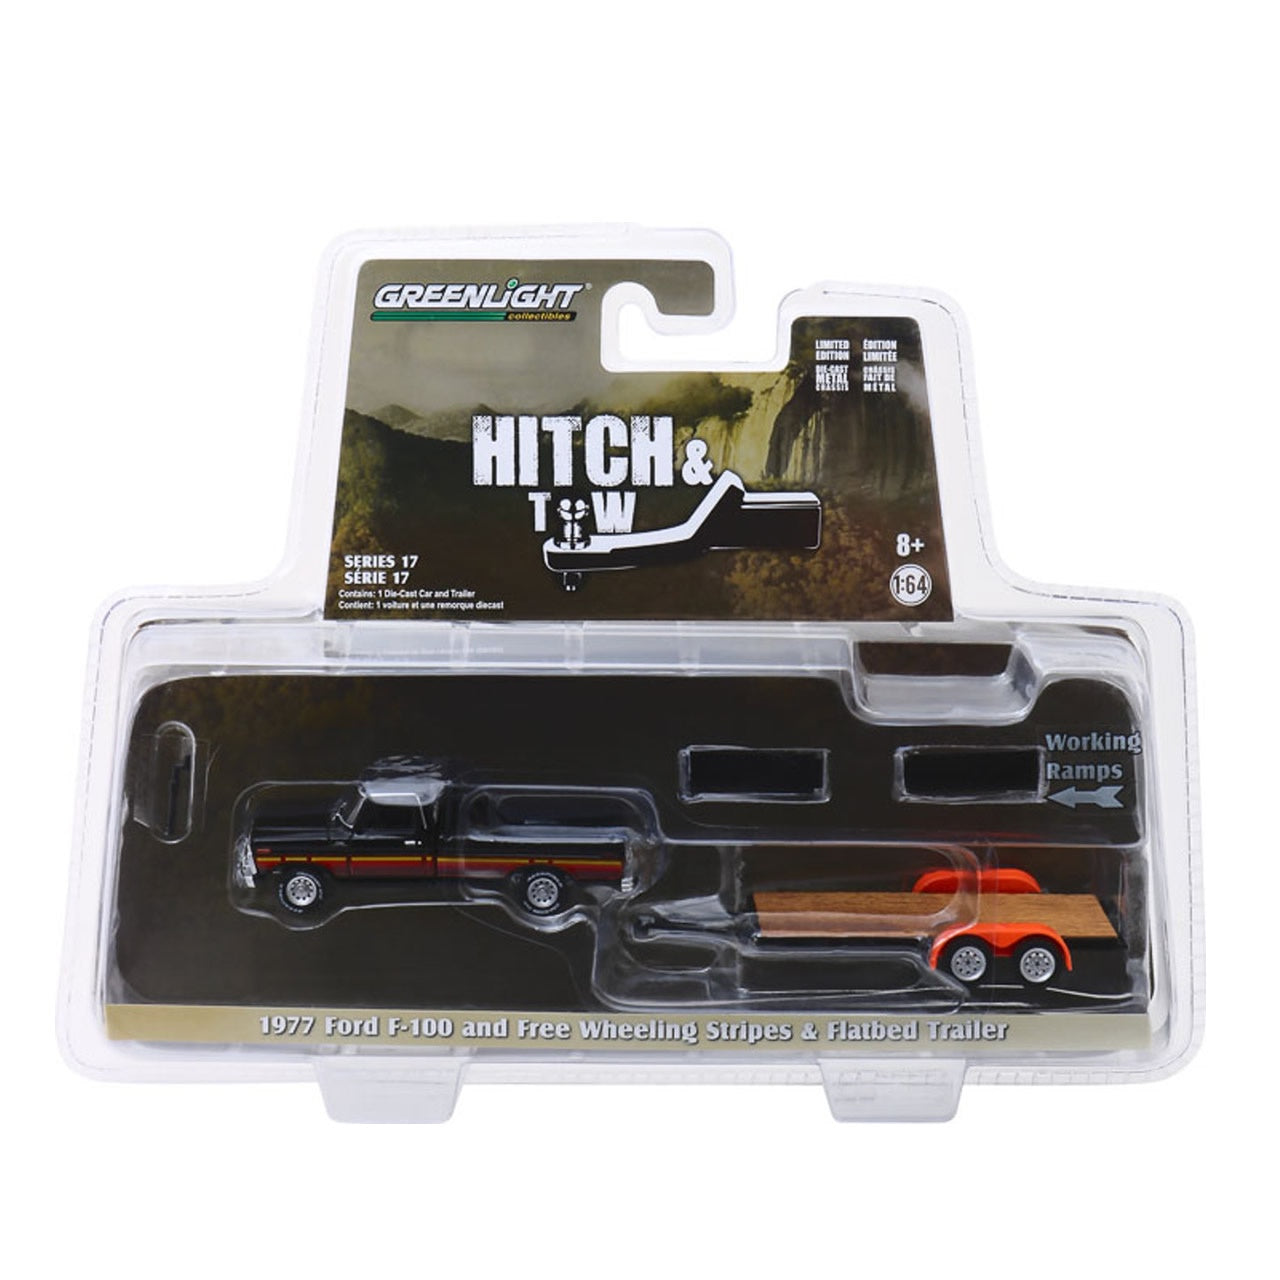 Greenlight - 'Hitch & Tow' Series 17 - 1977 Ford F100